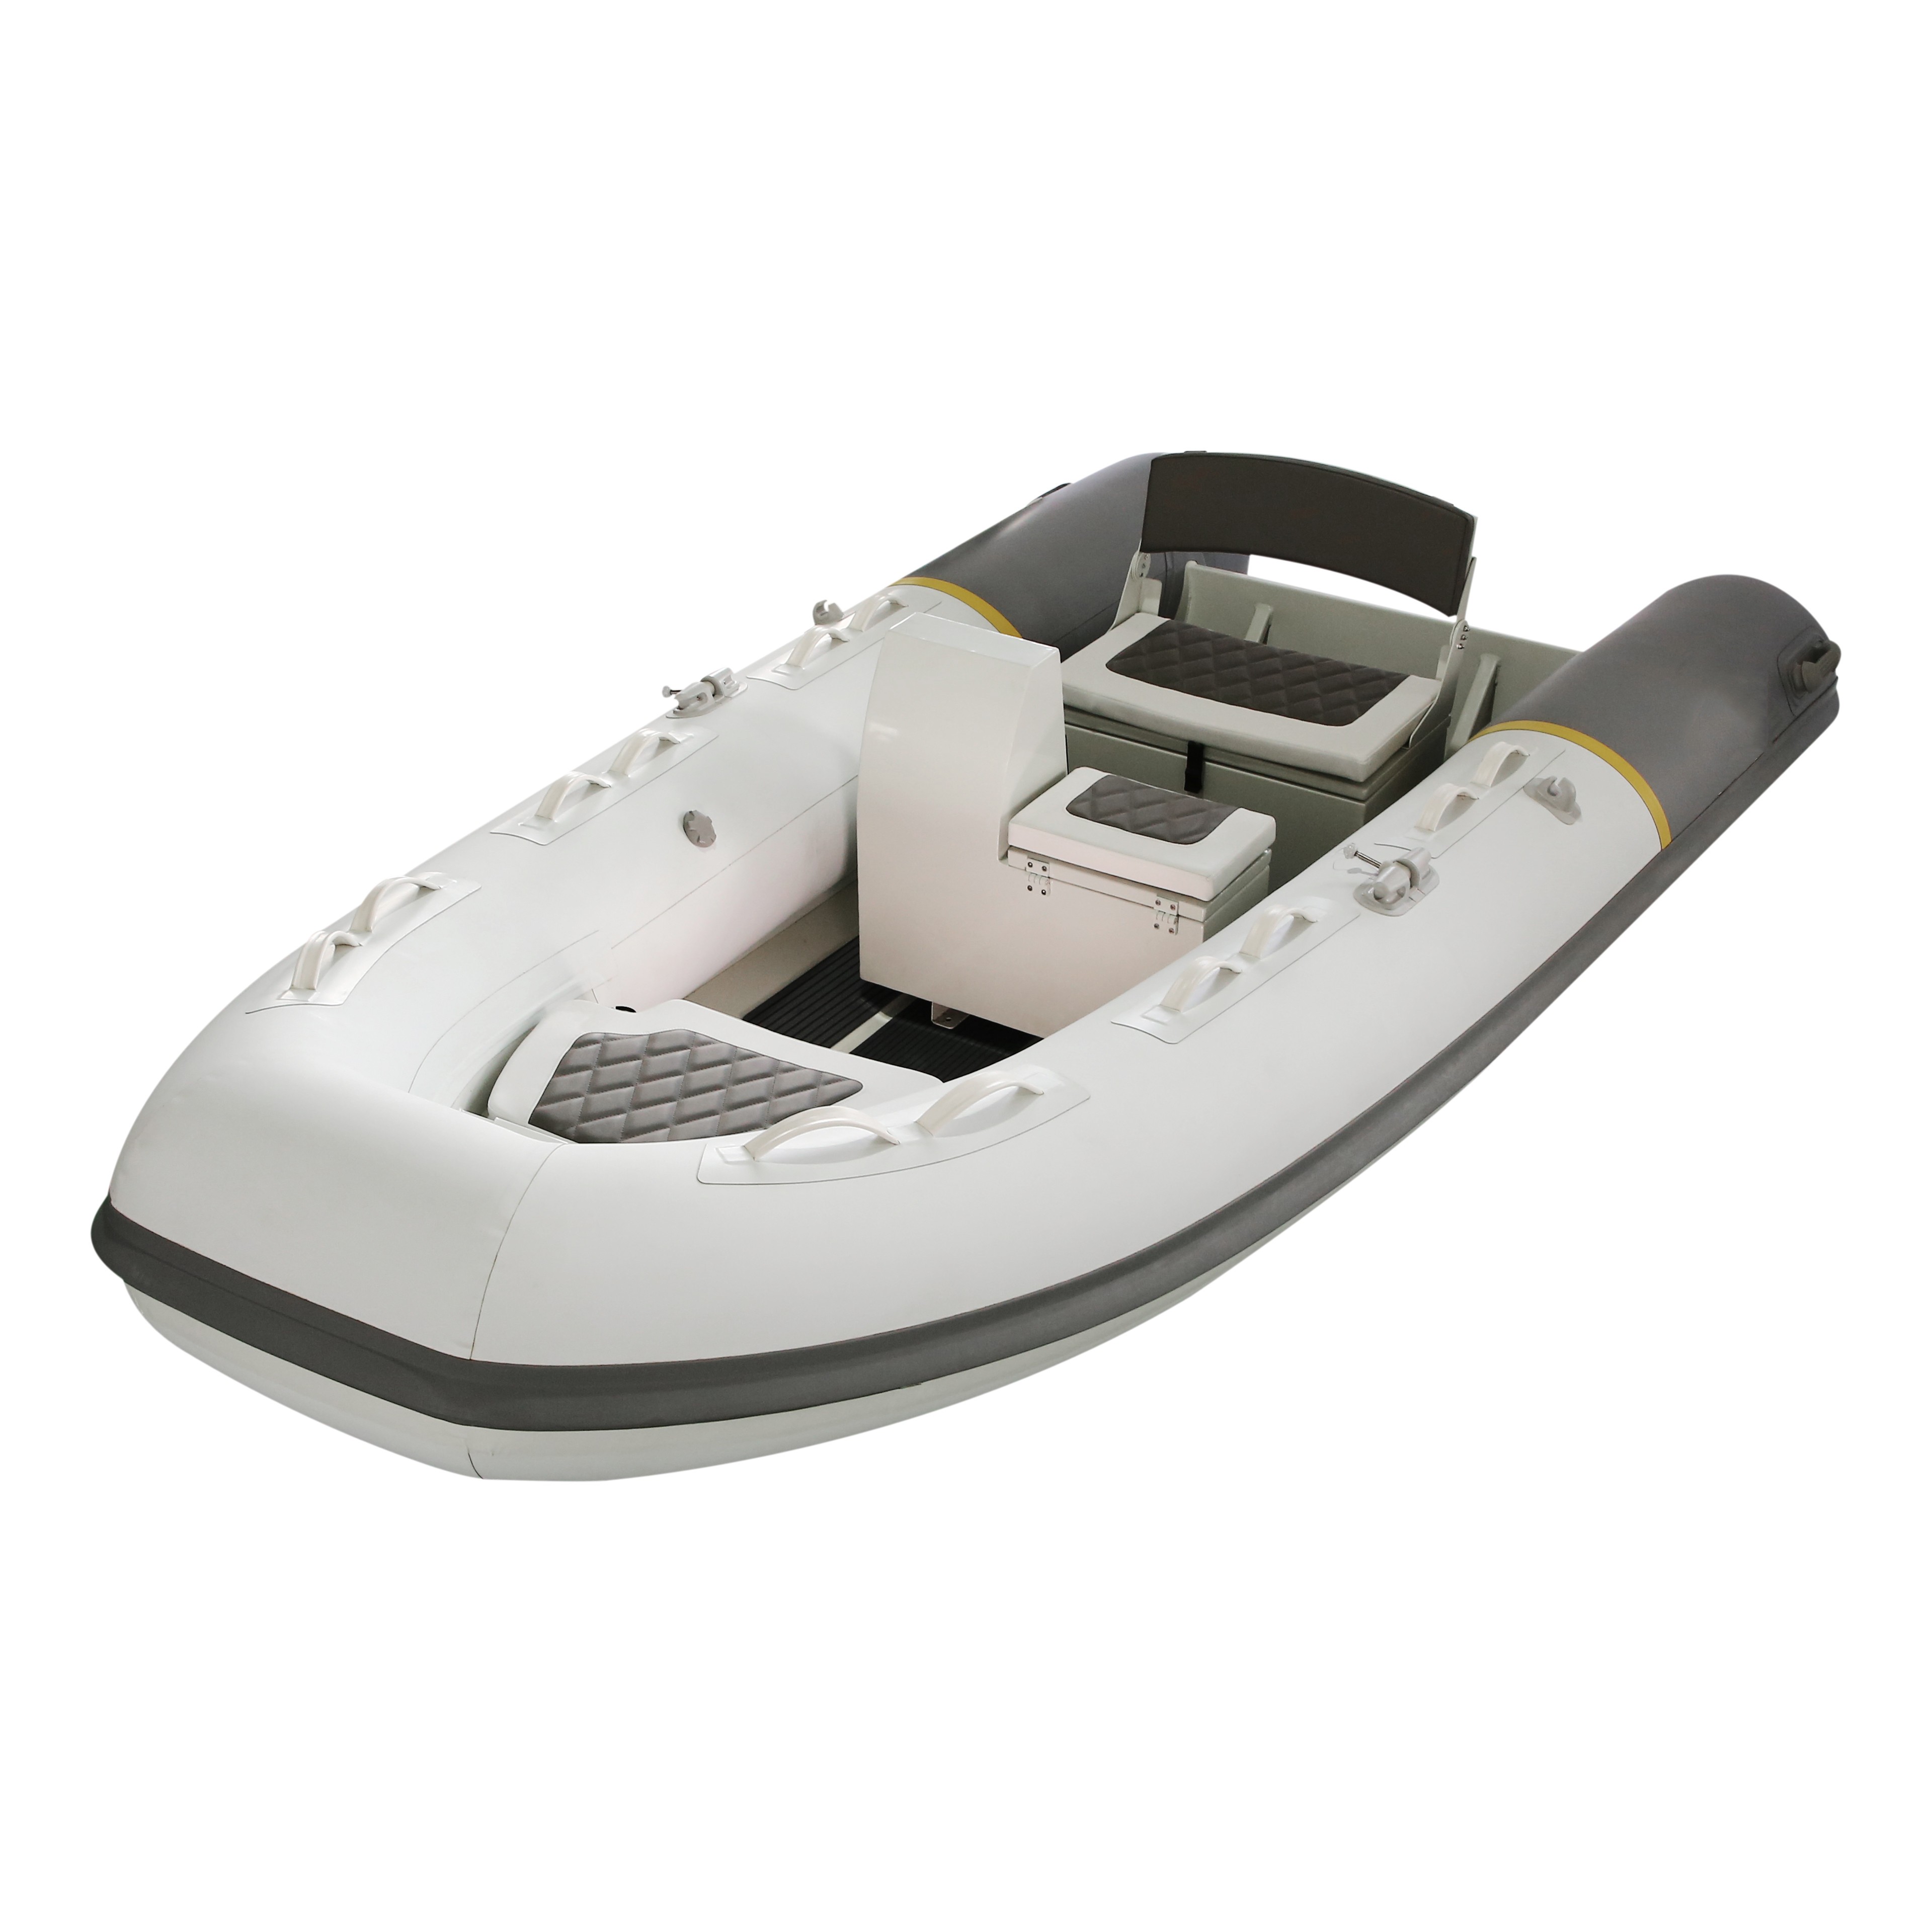 Rigid hull center console dinghy with pvc or hypalon tube